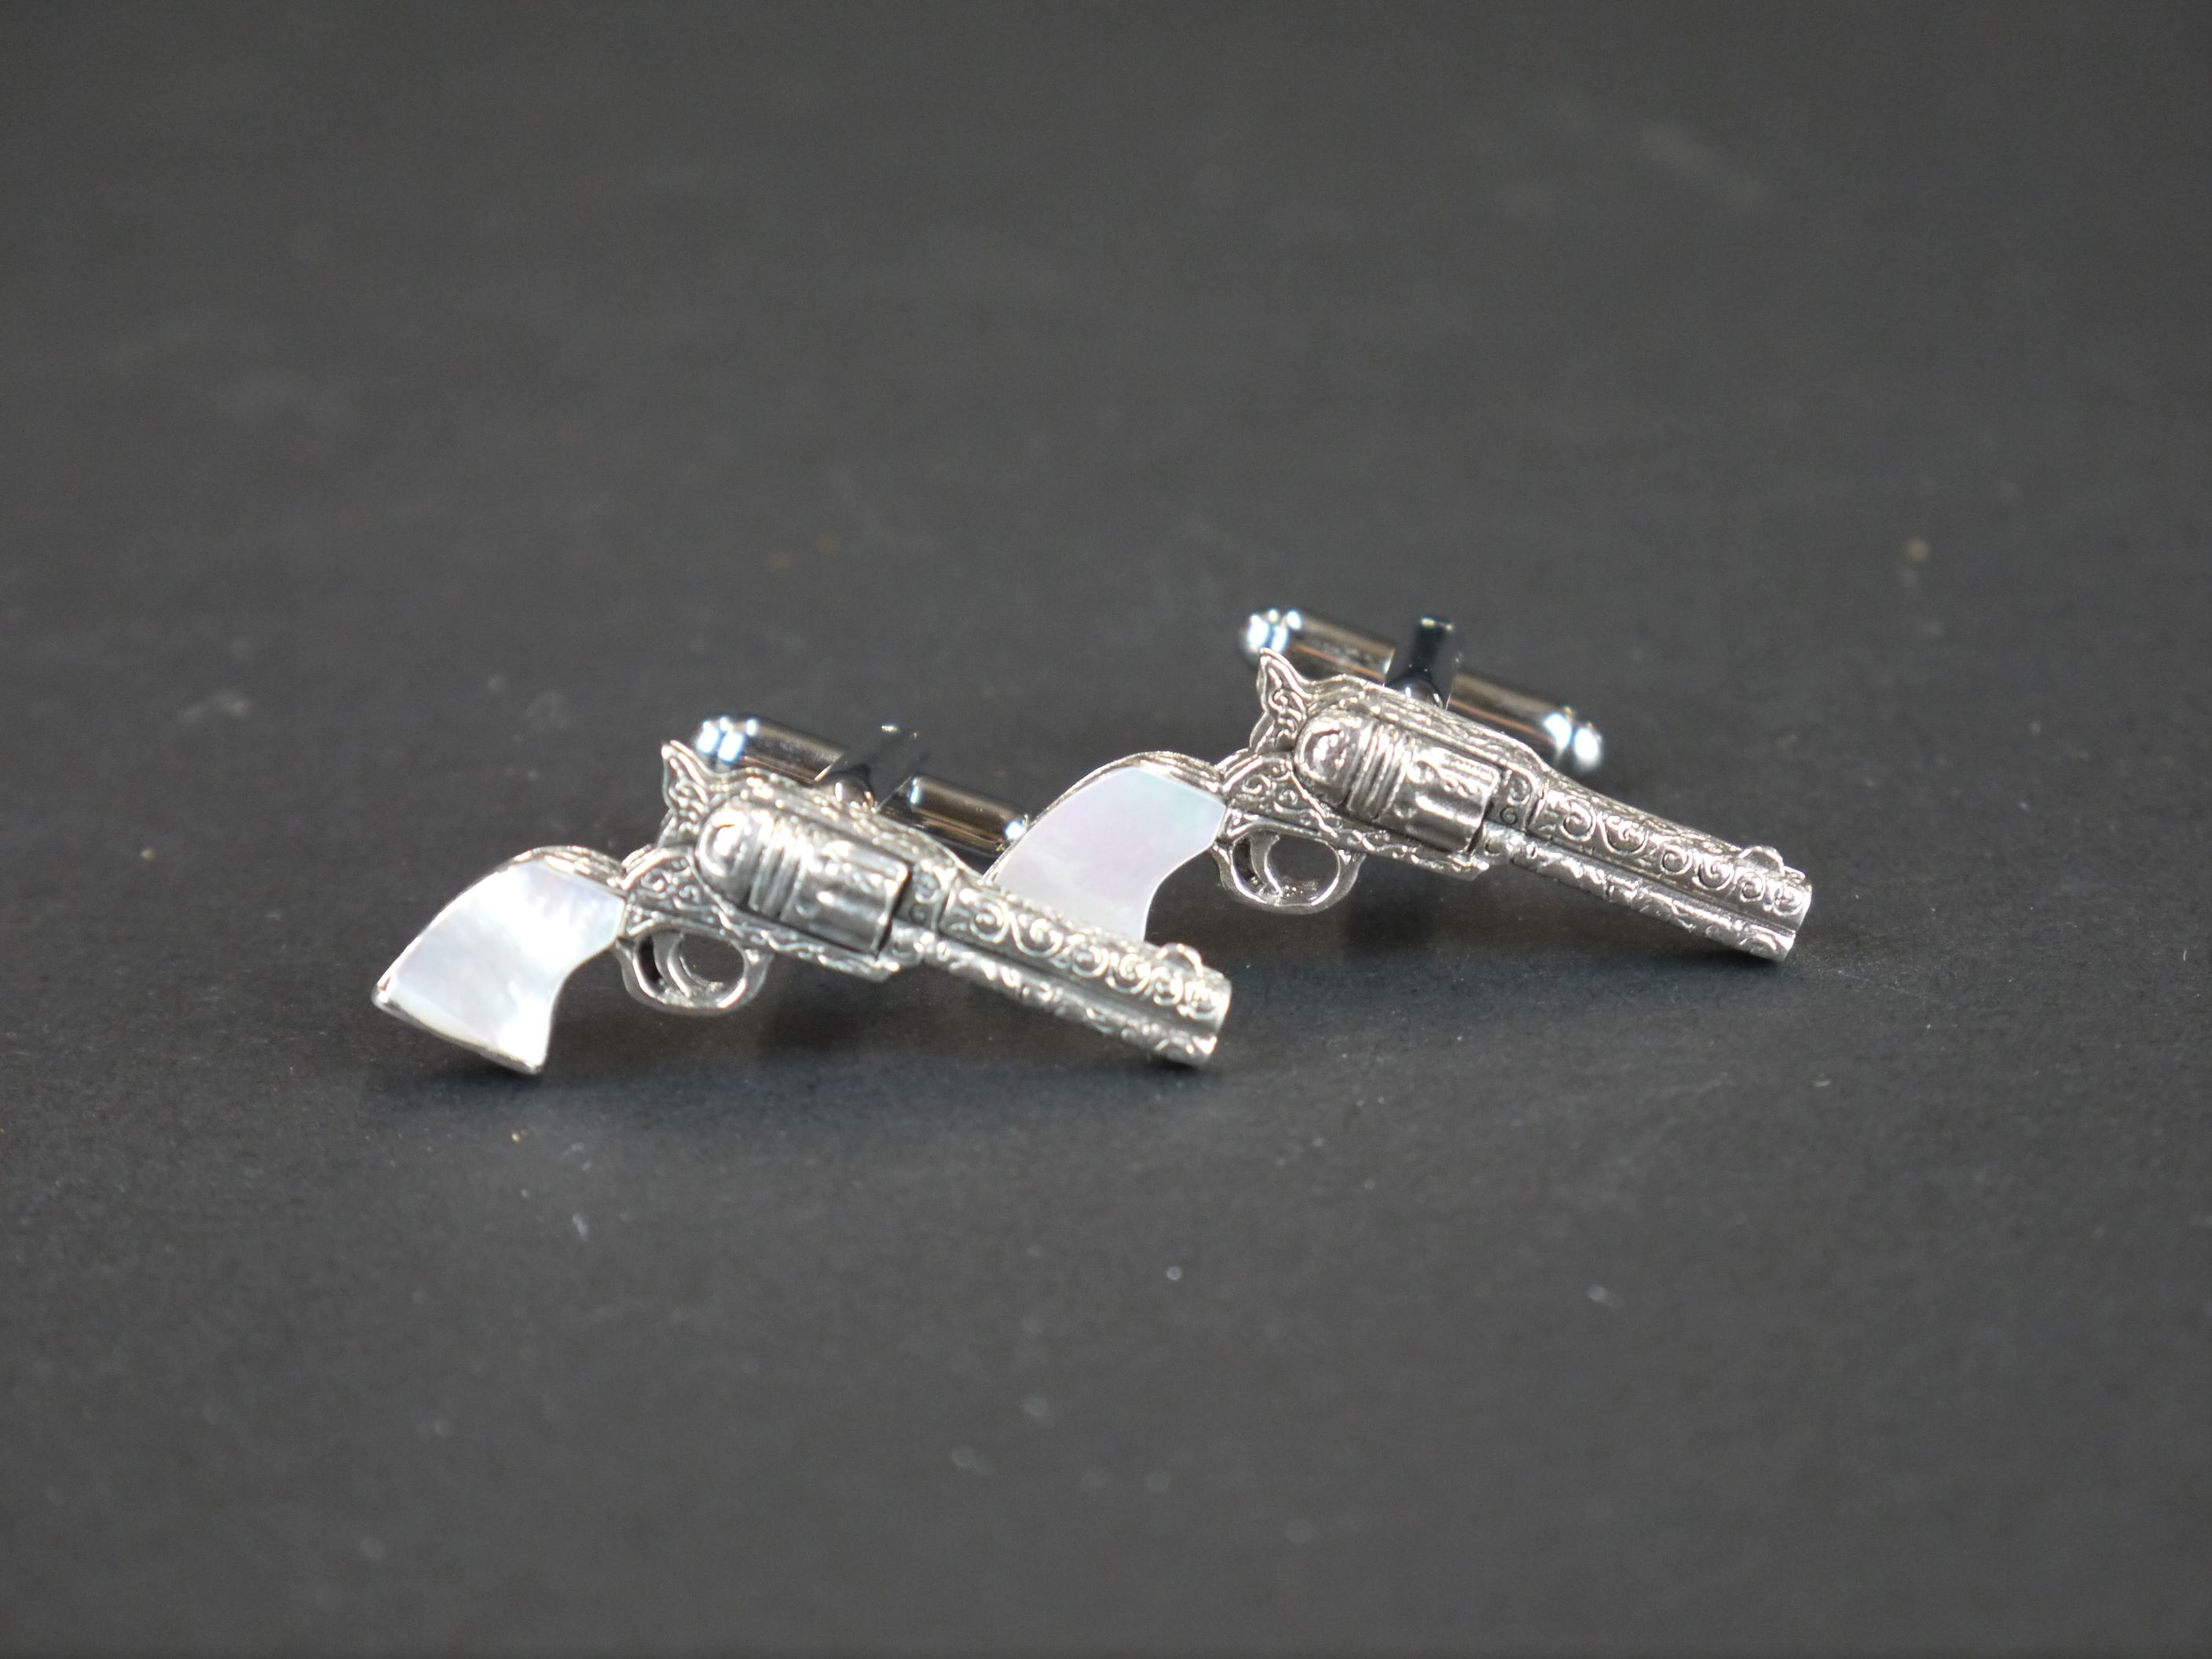 Pair of silver pistol cufflinks with mother-of-pearl handles - Image 2 of 3